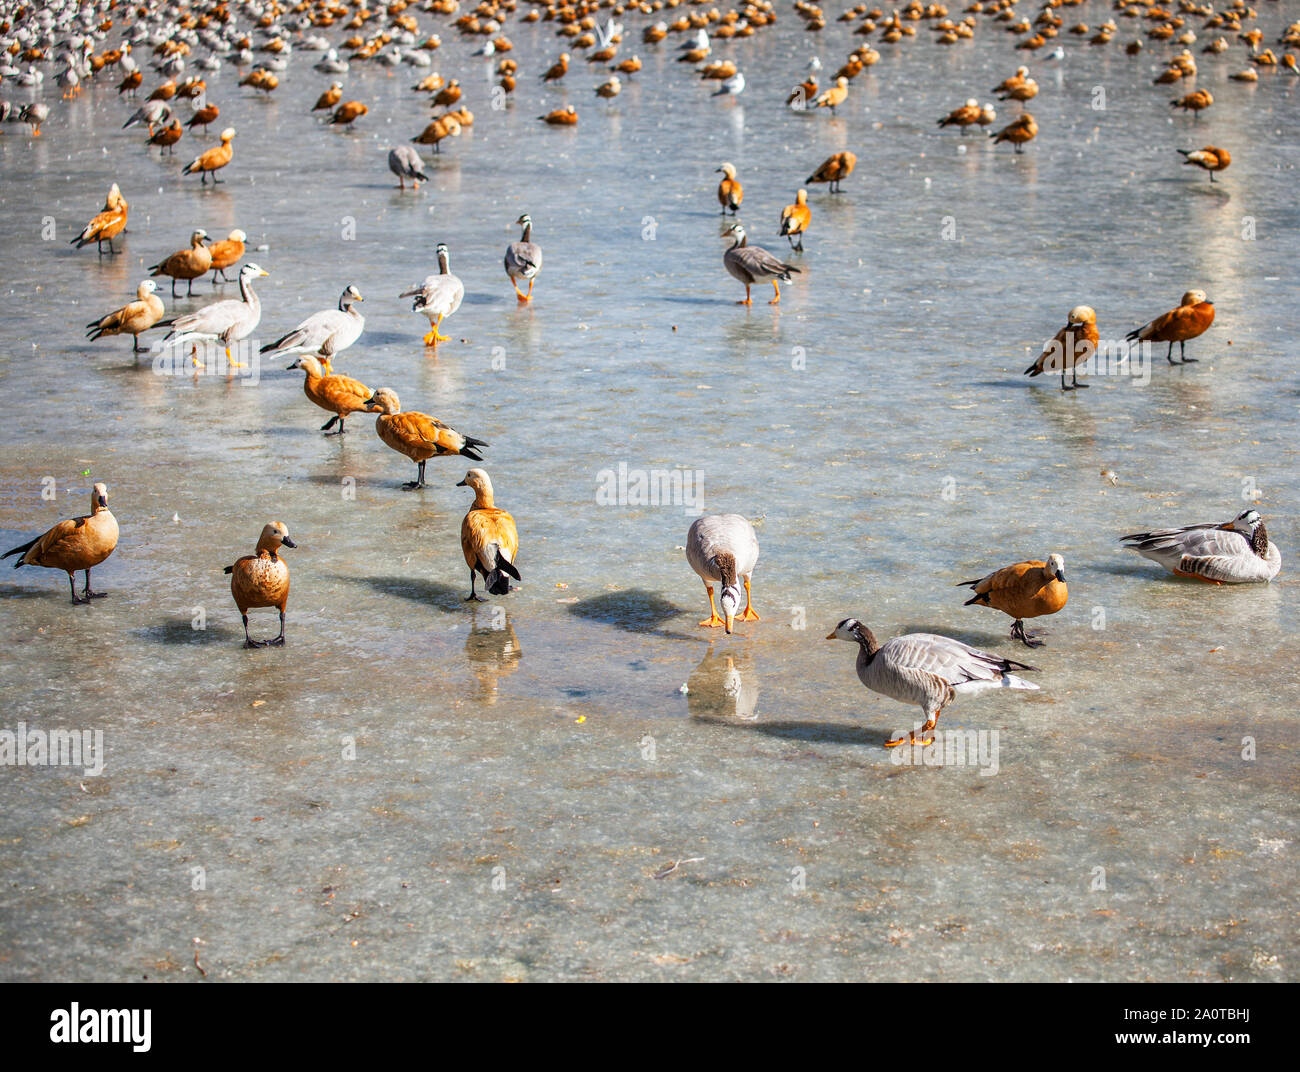 Bar-headed geese and ruddy shelducks wintering at a frozen pond in Lhasa, Tibet Stock Photo